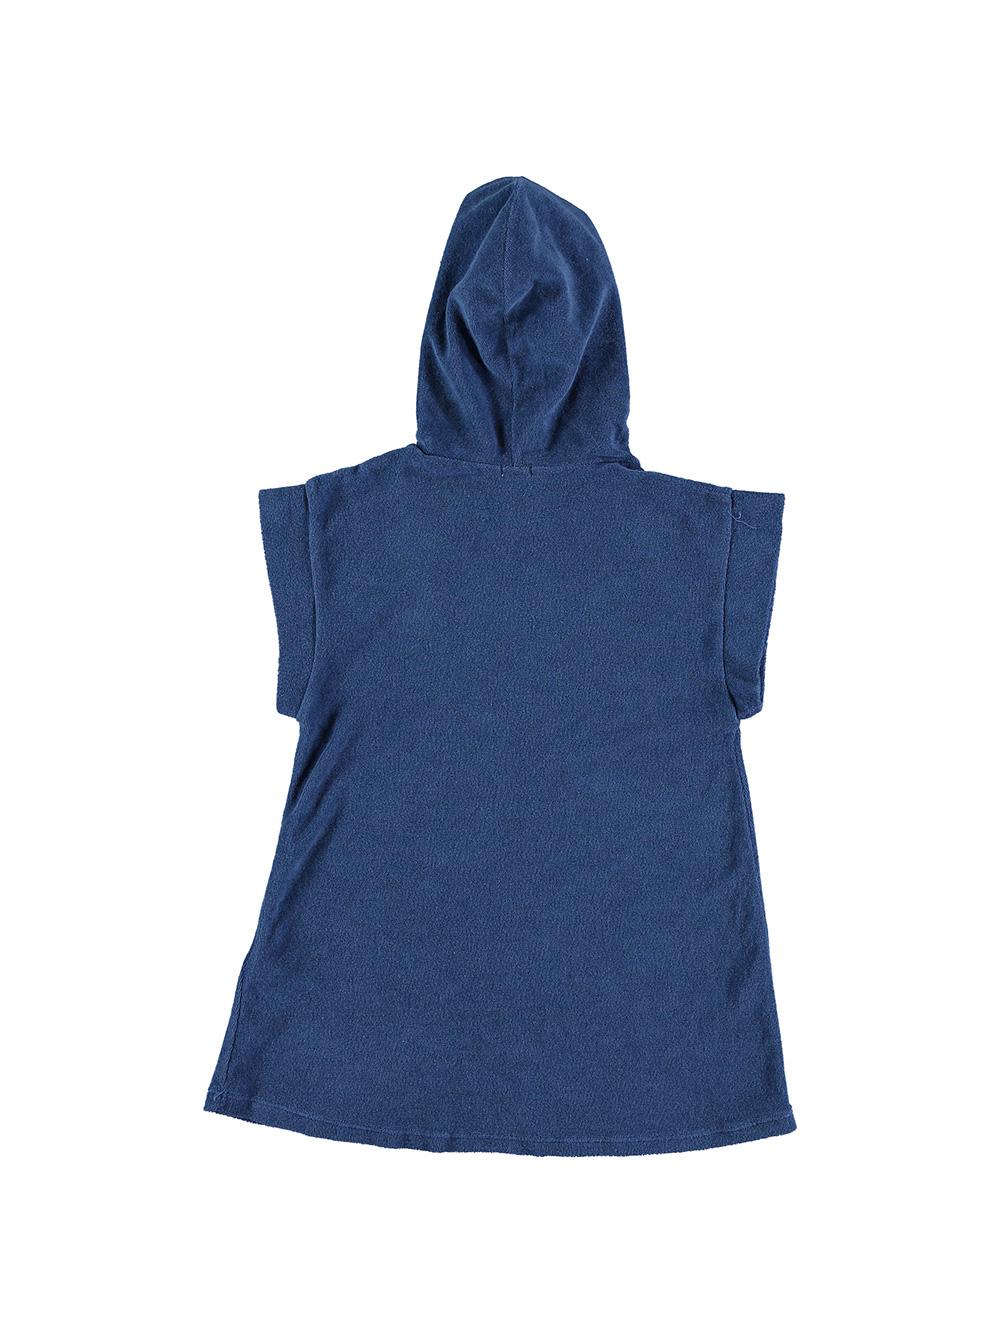 NAVY BLUE BUTTERFLY EMBROIDERED TERRY HOODED DRESS